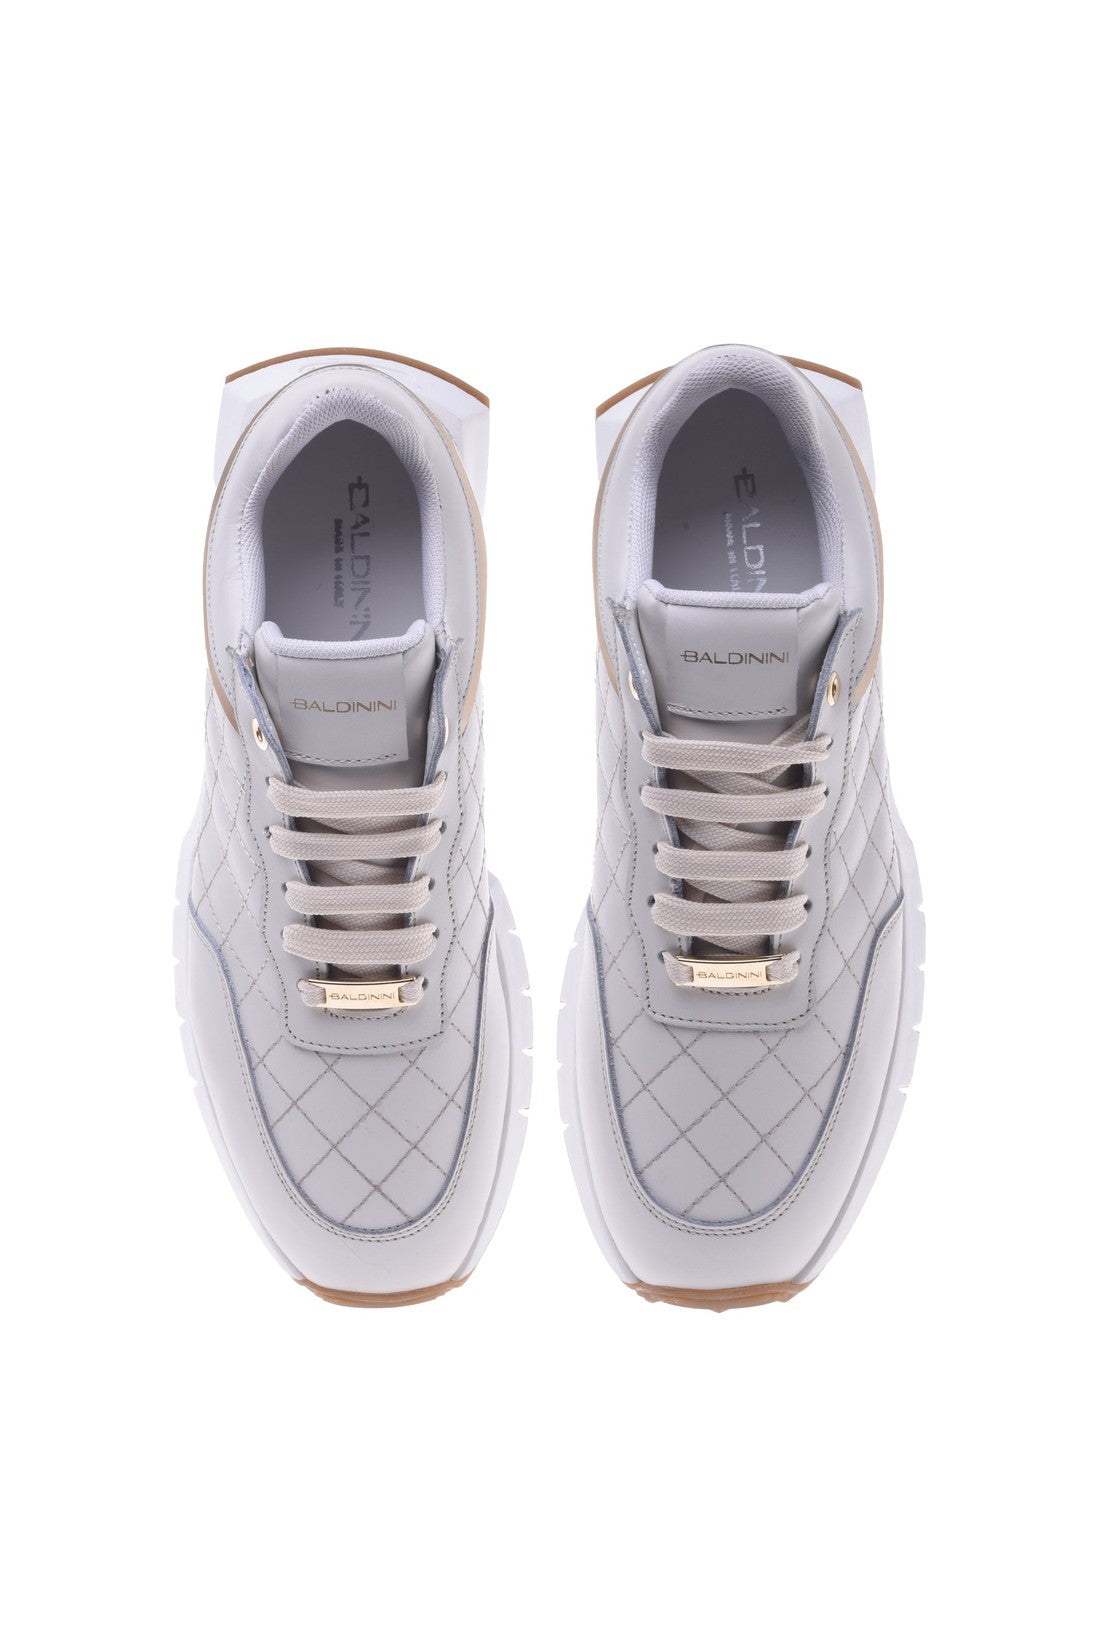 BALDININI-OUTLET-SALE-Sneakers-in-cream-quilted-leather-Sneaker-ARCHIVE-COLLECTION-2.jpg